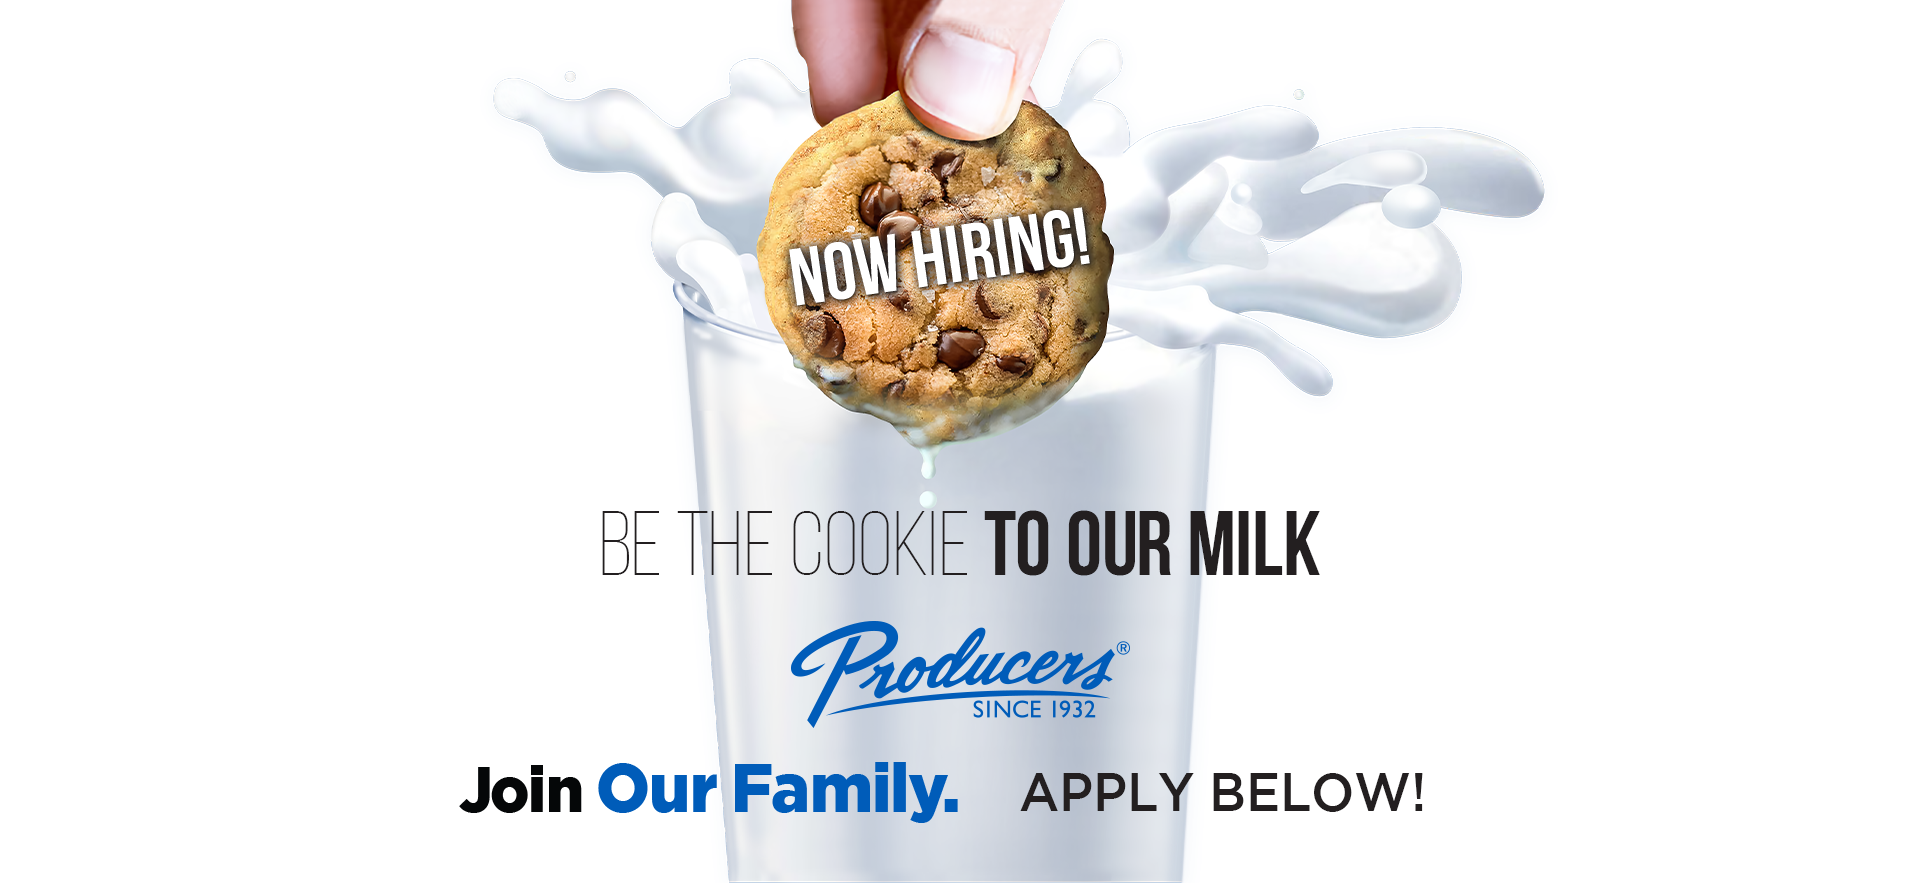 BE THE COOKIE TO OUR MILK. Producers Dairy. Join Our Family. APPLY BELOW.